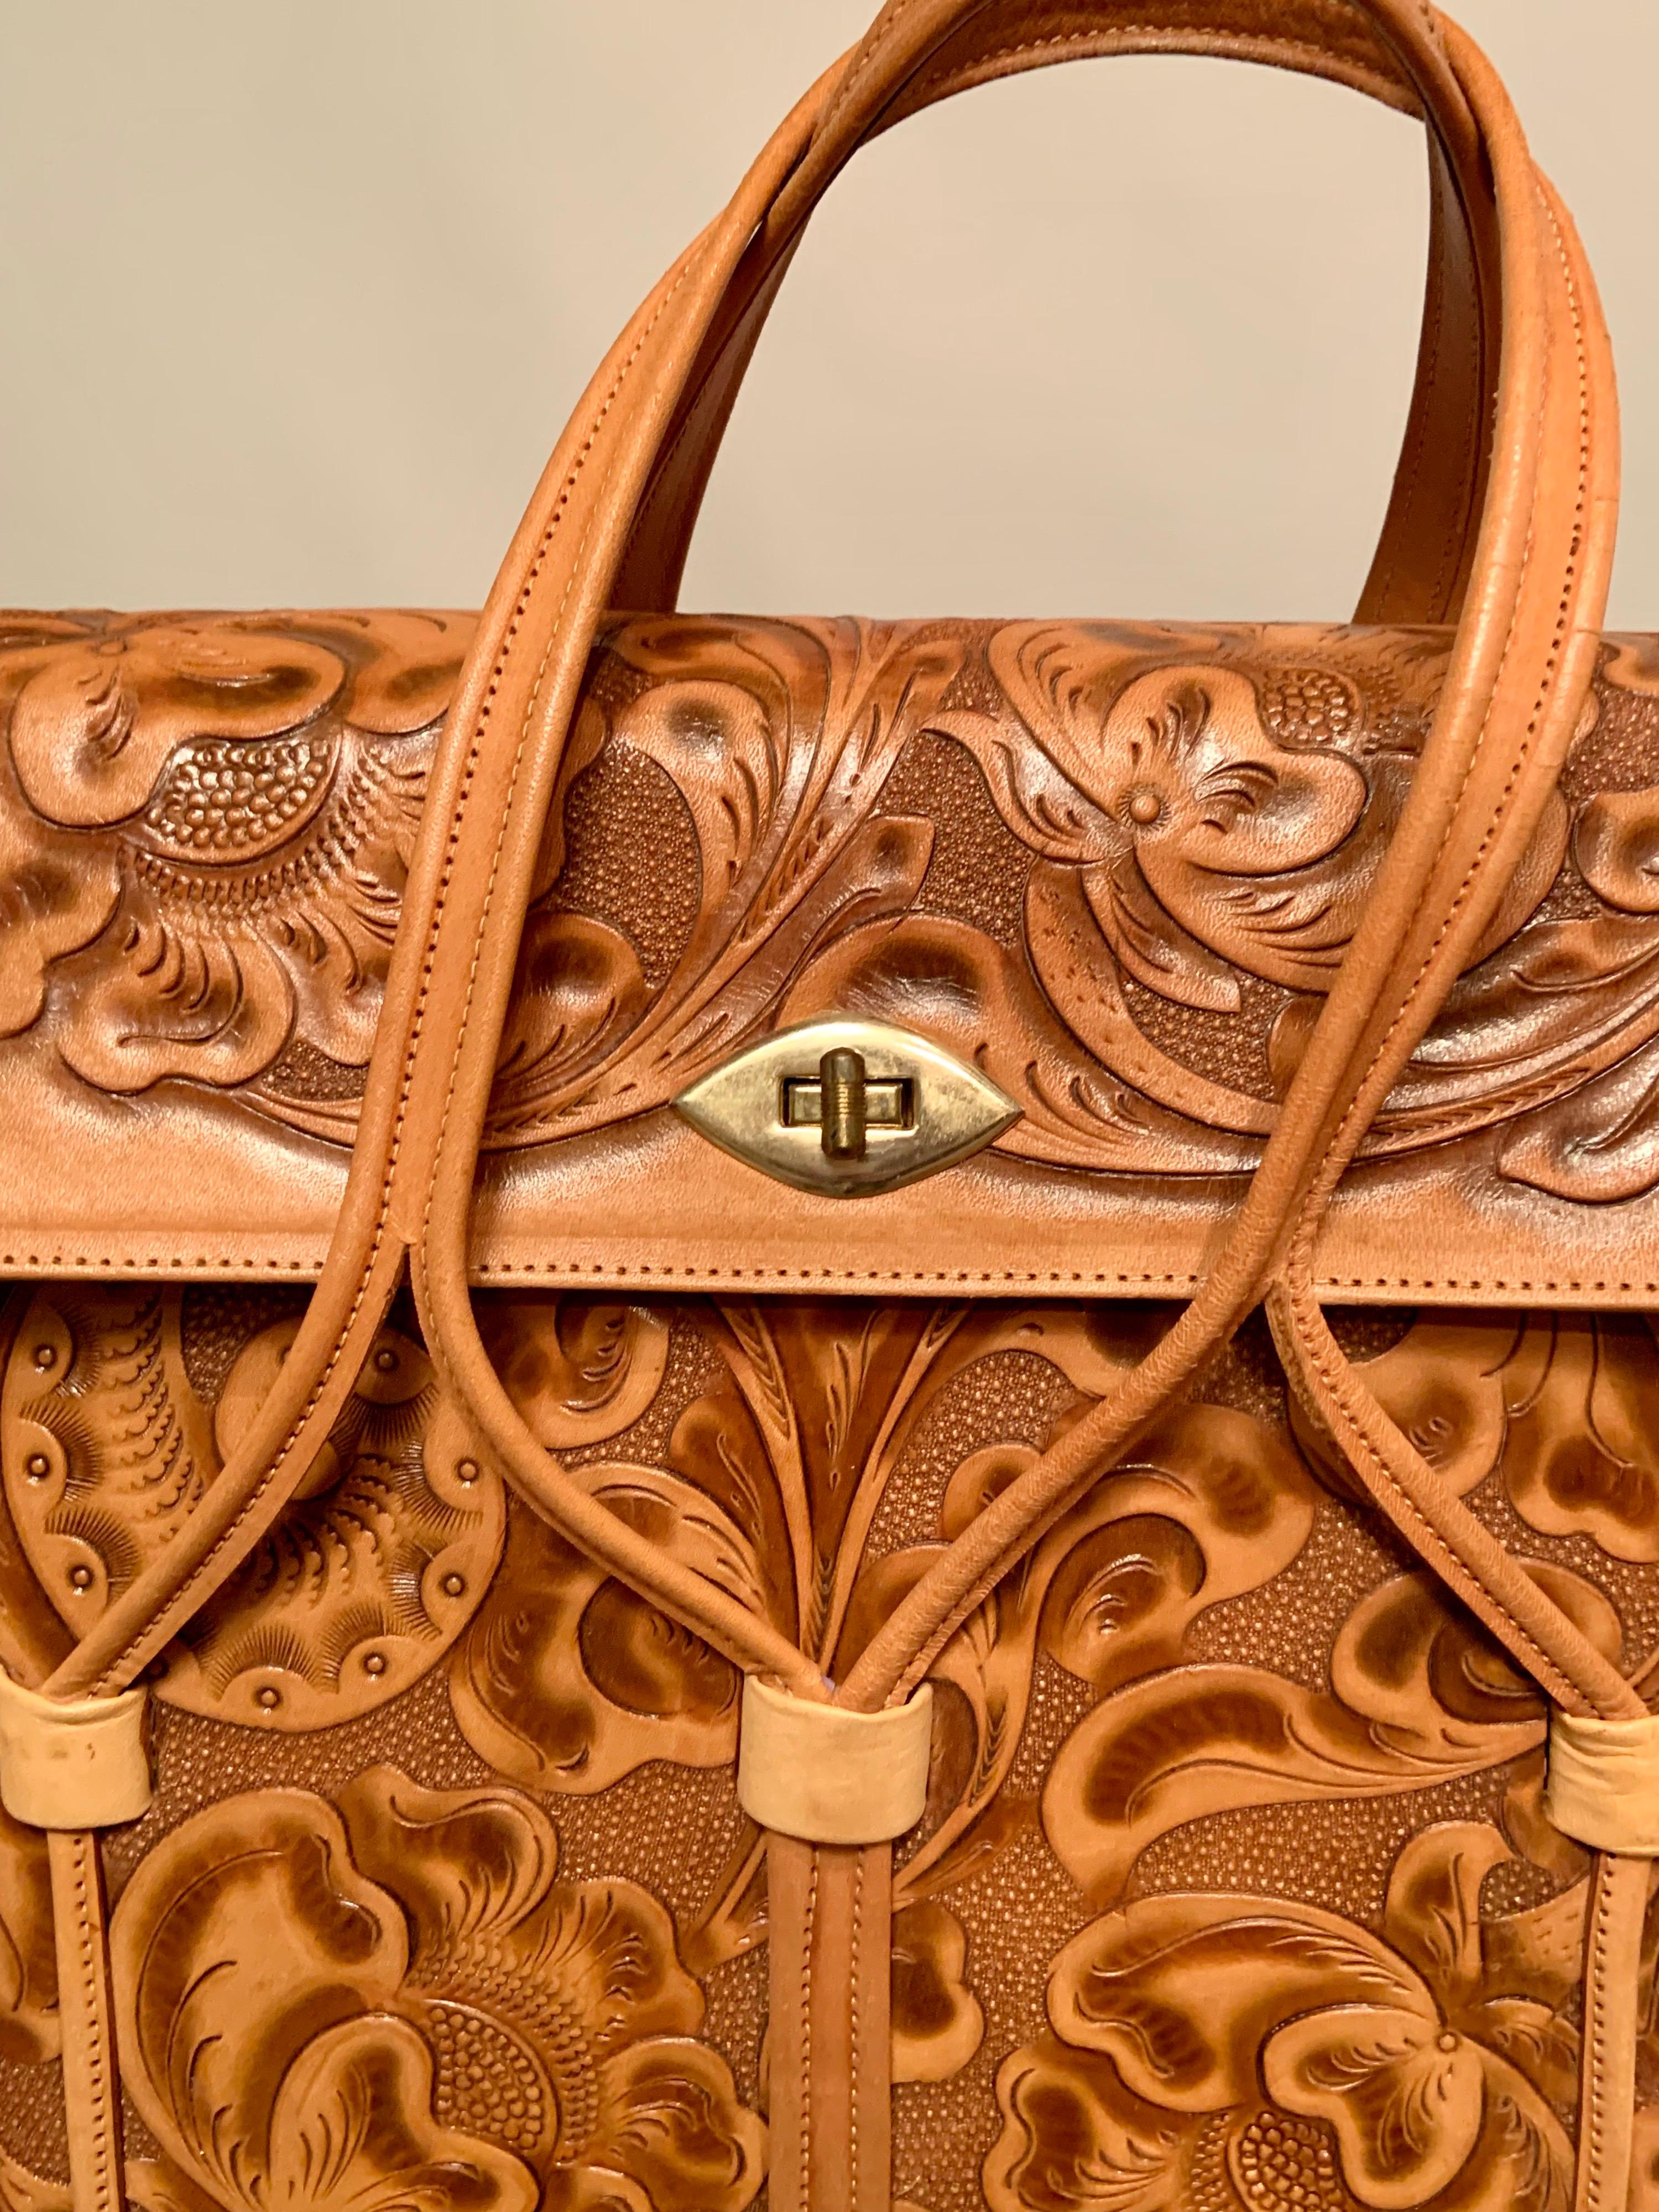 Made in Mexico , this is the largest hand tooled leather bag  that I have ever seen. A floral design is tooled into the leather and three straps are used to make the two handles.  The bag is decorated on the front, sides, back and even the bottom,